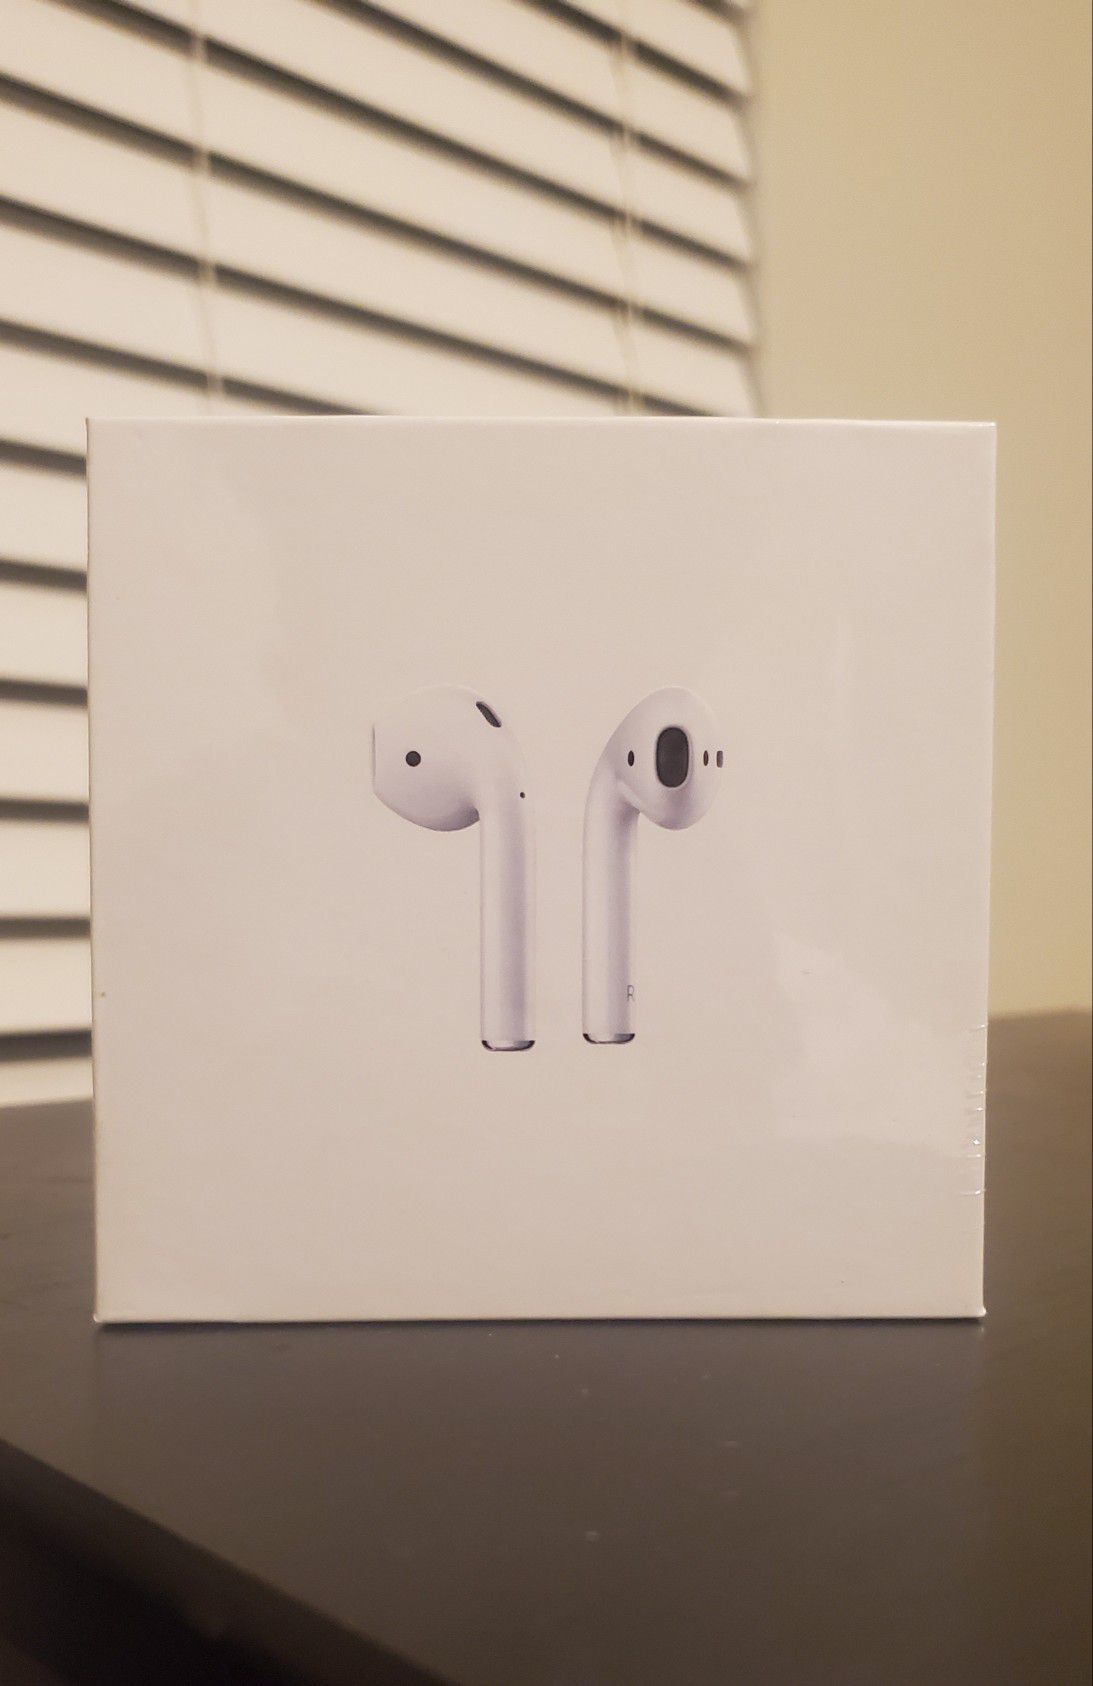 NEW AirPods 2nd Generation With Wireless Charging Case for Sale. BOXED AND SEALED. MPU.